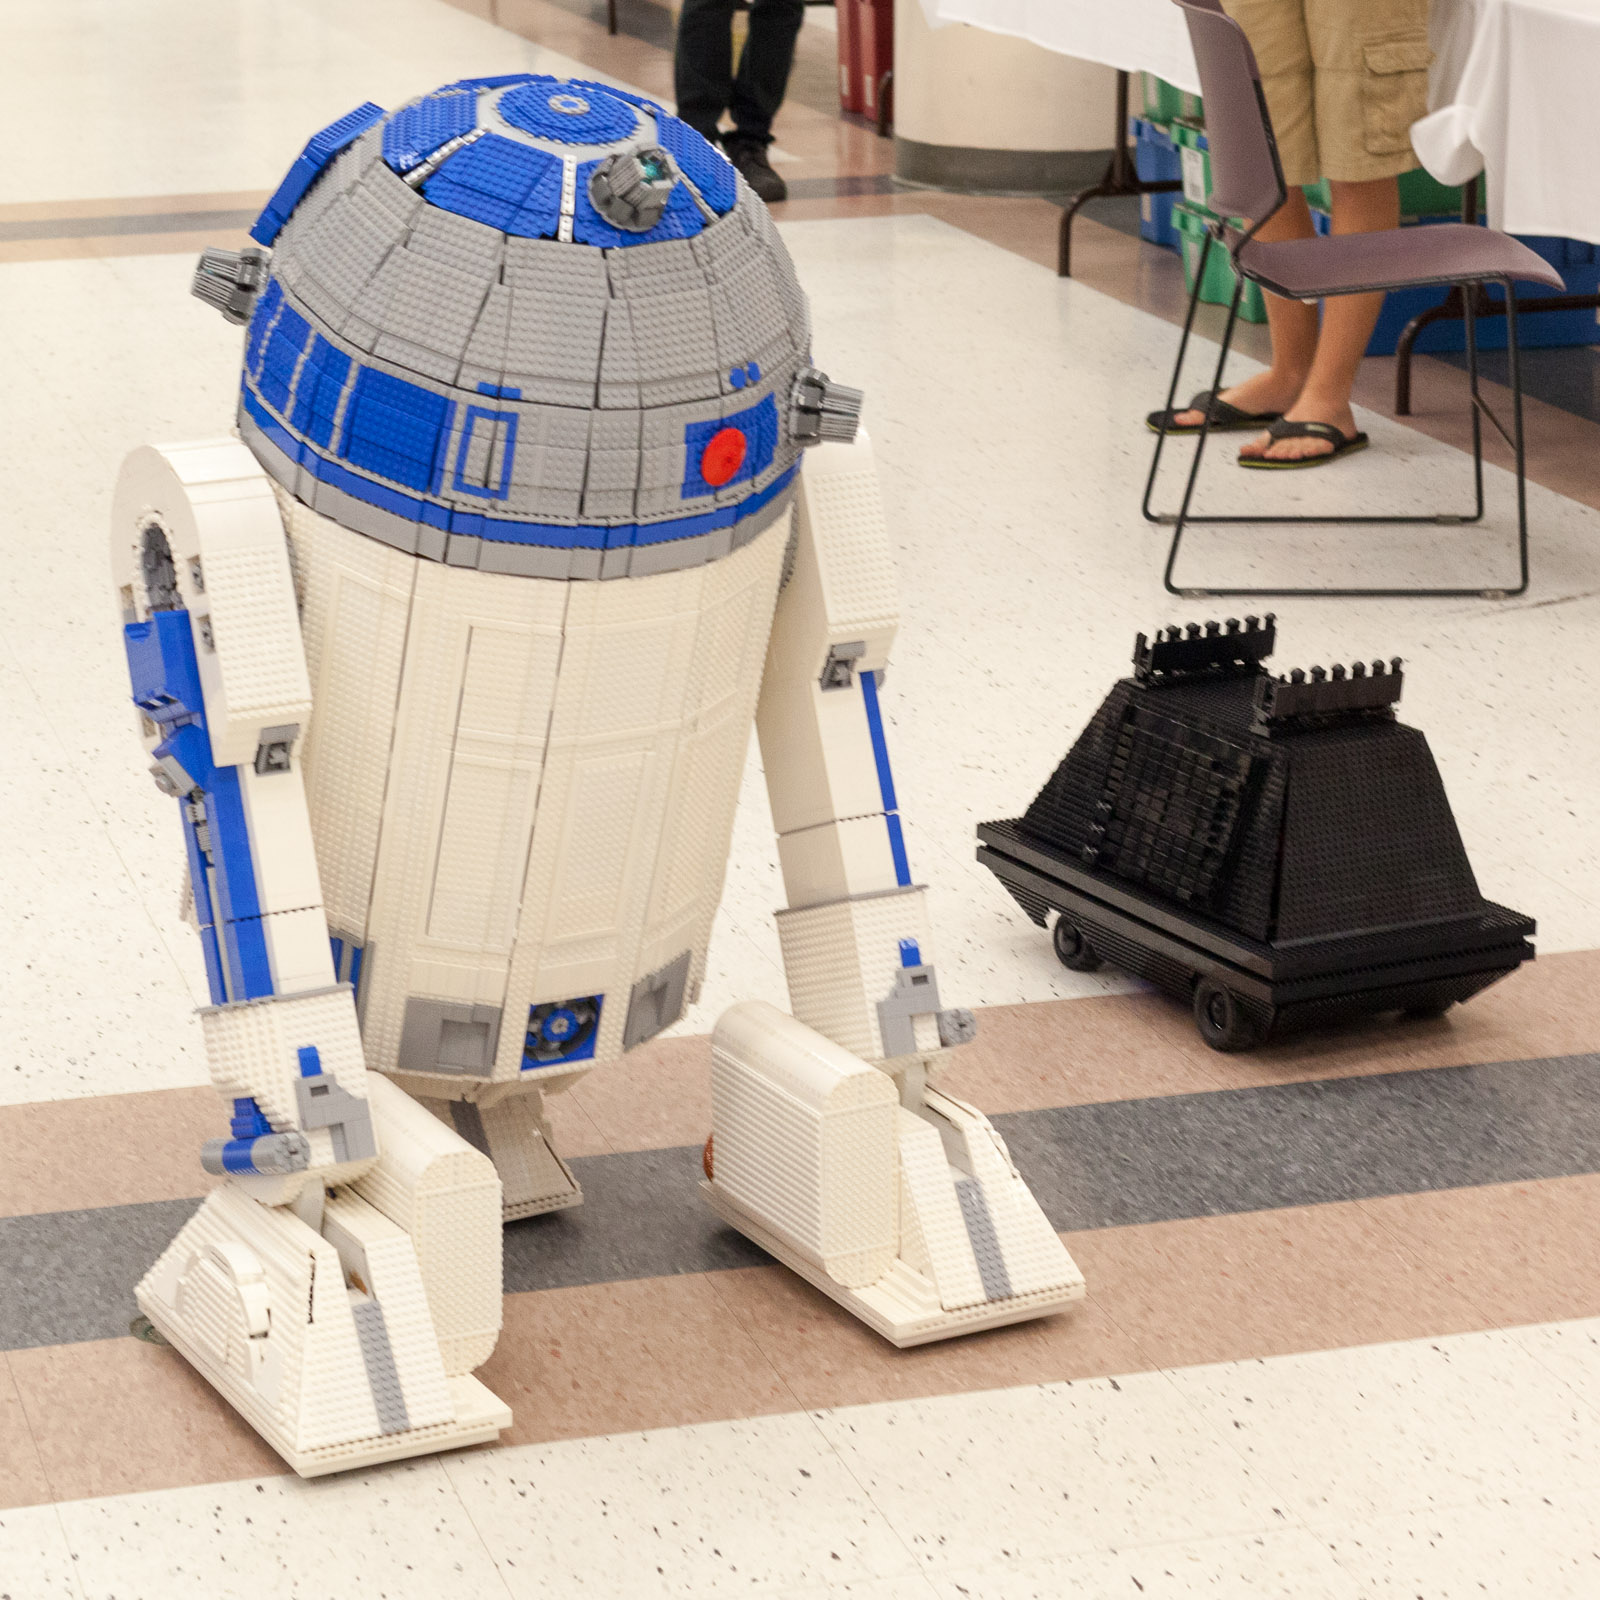 Life-size R2D2 has a Mouse droid friend.  Both are remote-controlled! (By Shawn Steele & family)